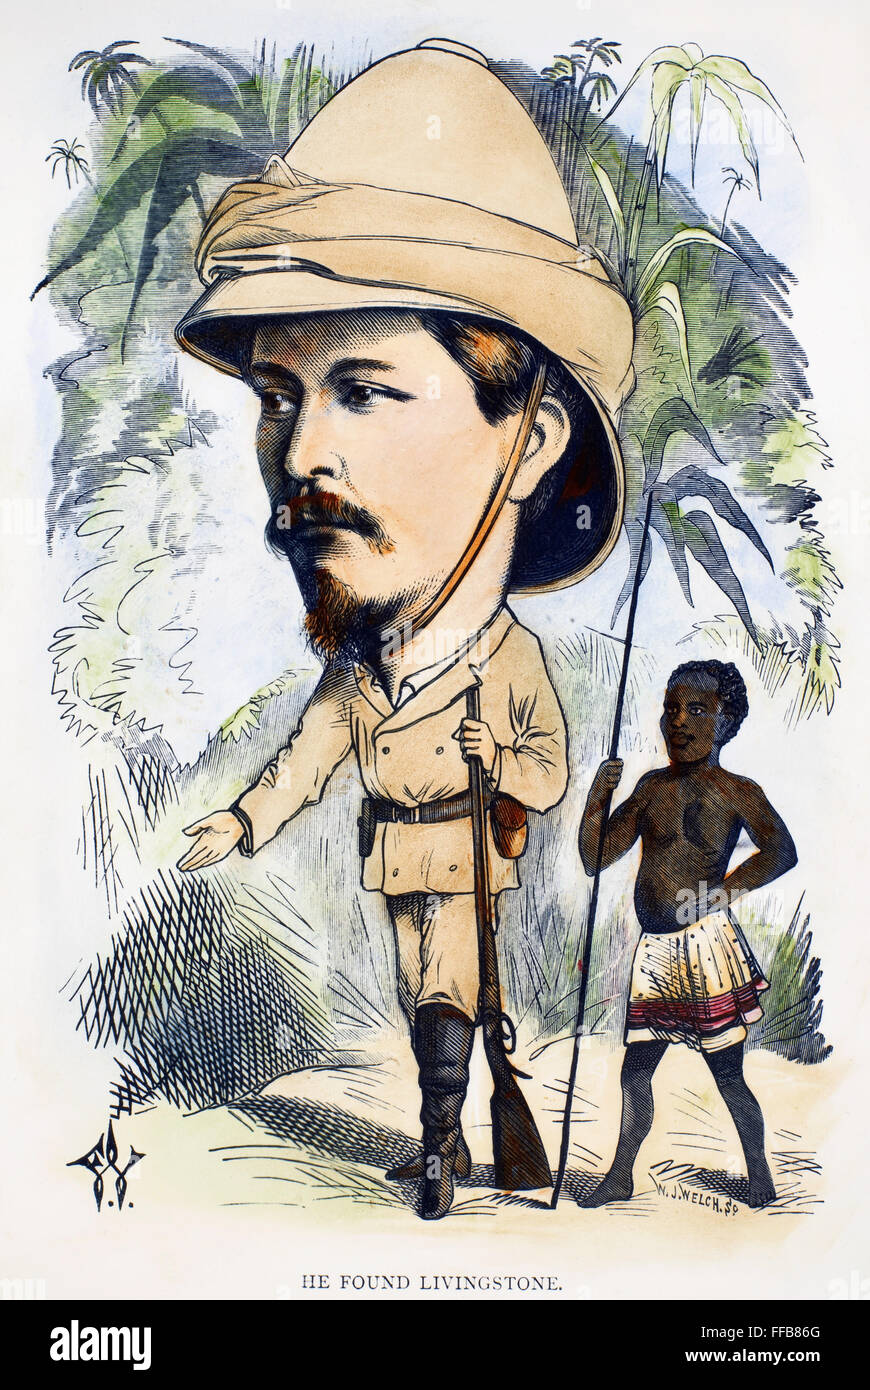 SIR HENRY MORTON STANLEY /n(1841-1904). British journalist and explorer. Caricature, 1872, by Frederick Waddy. Stock Photo